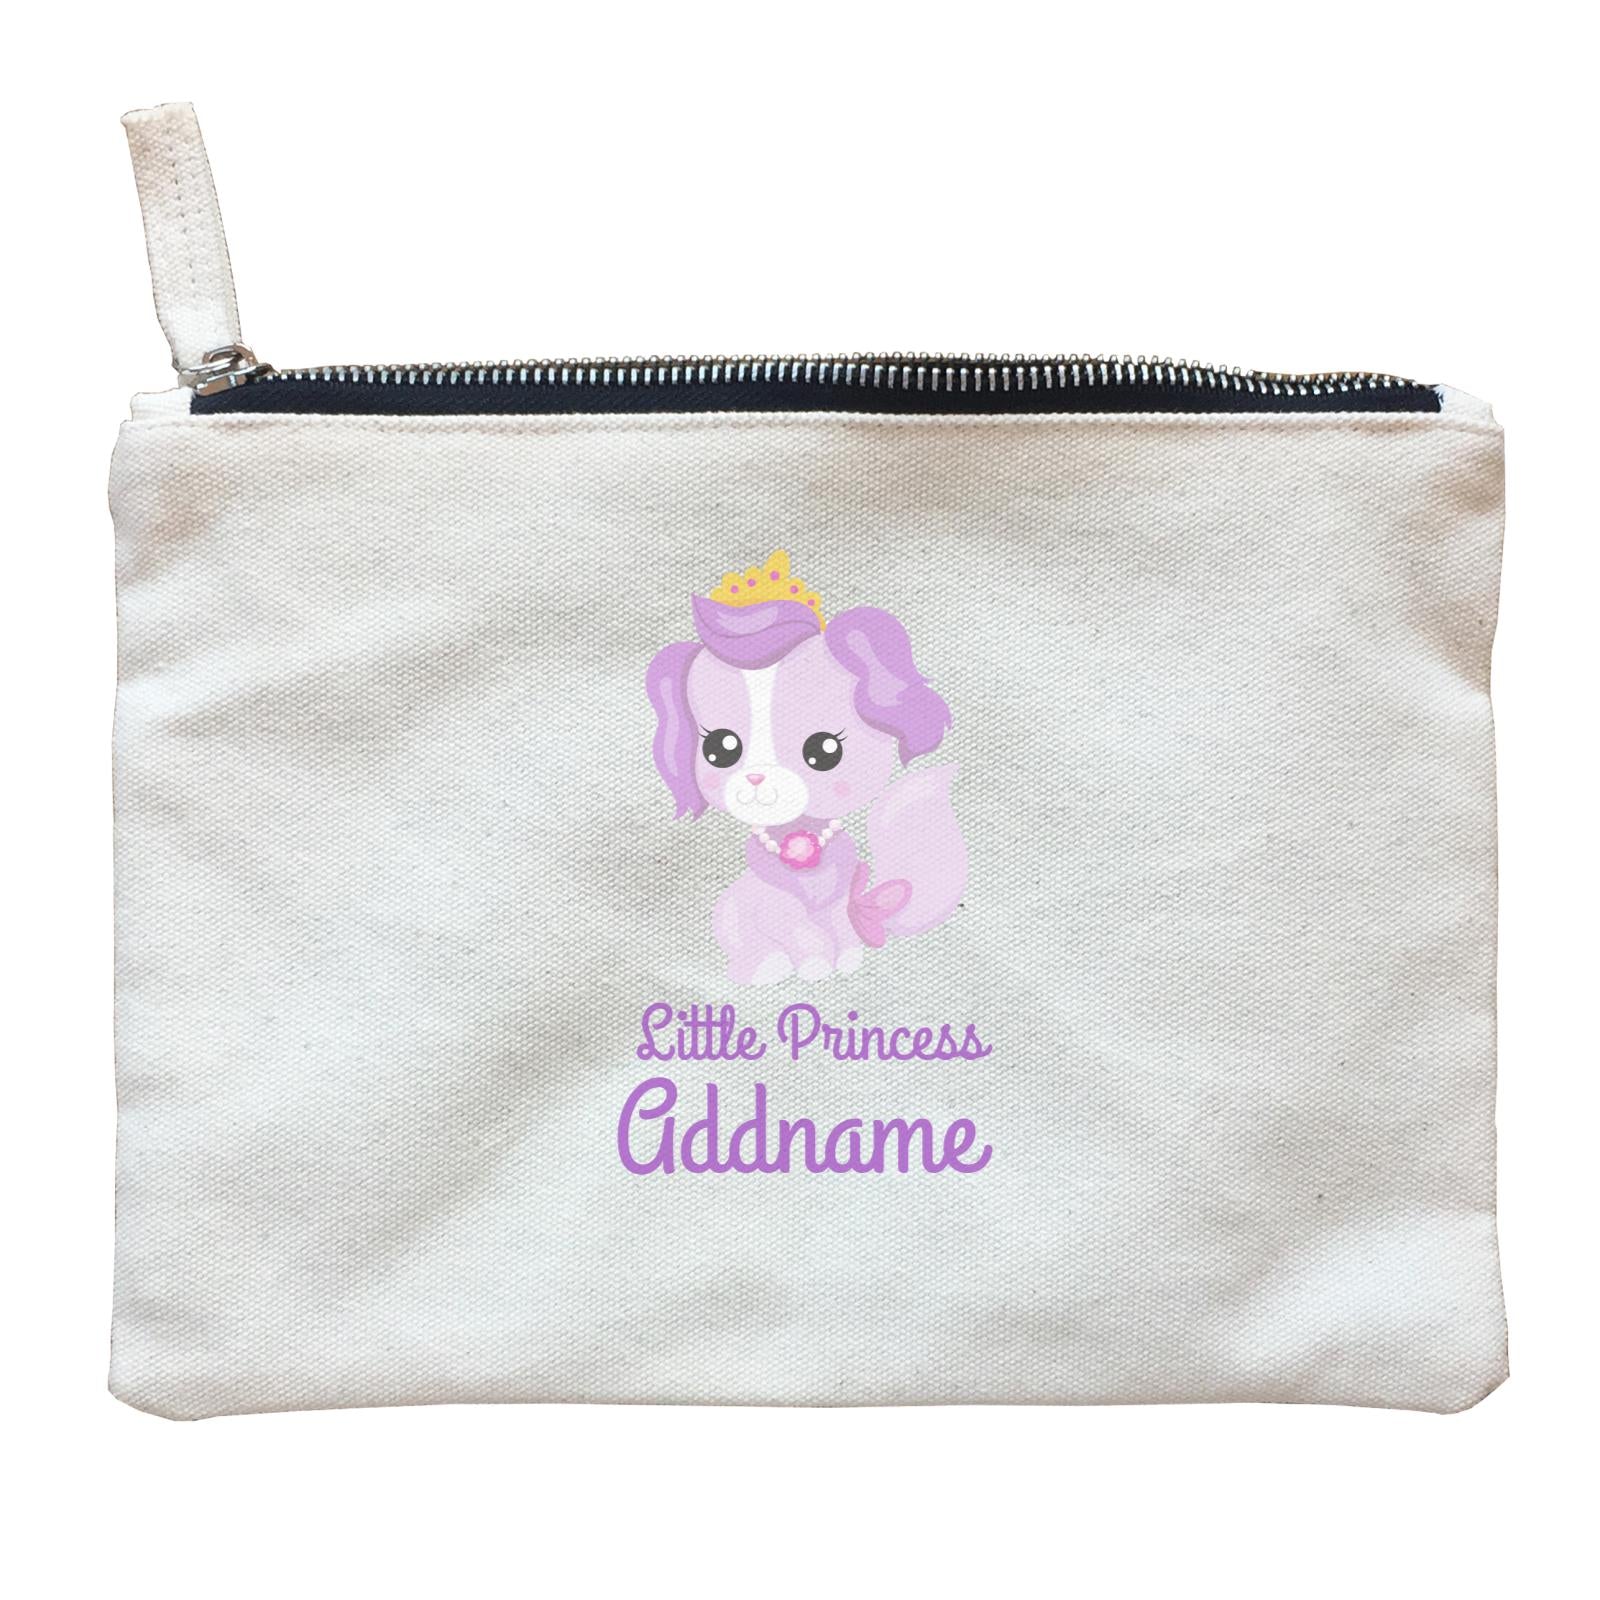 Little Princess Pets Purple Dog with Crown Addname Zipper Pouch